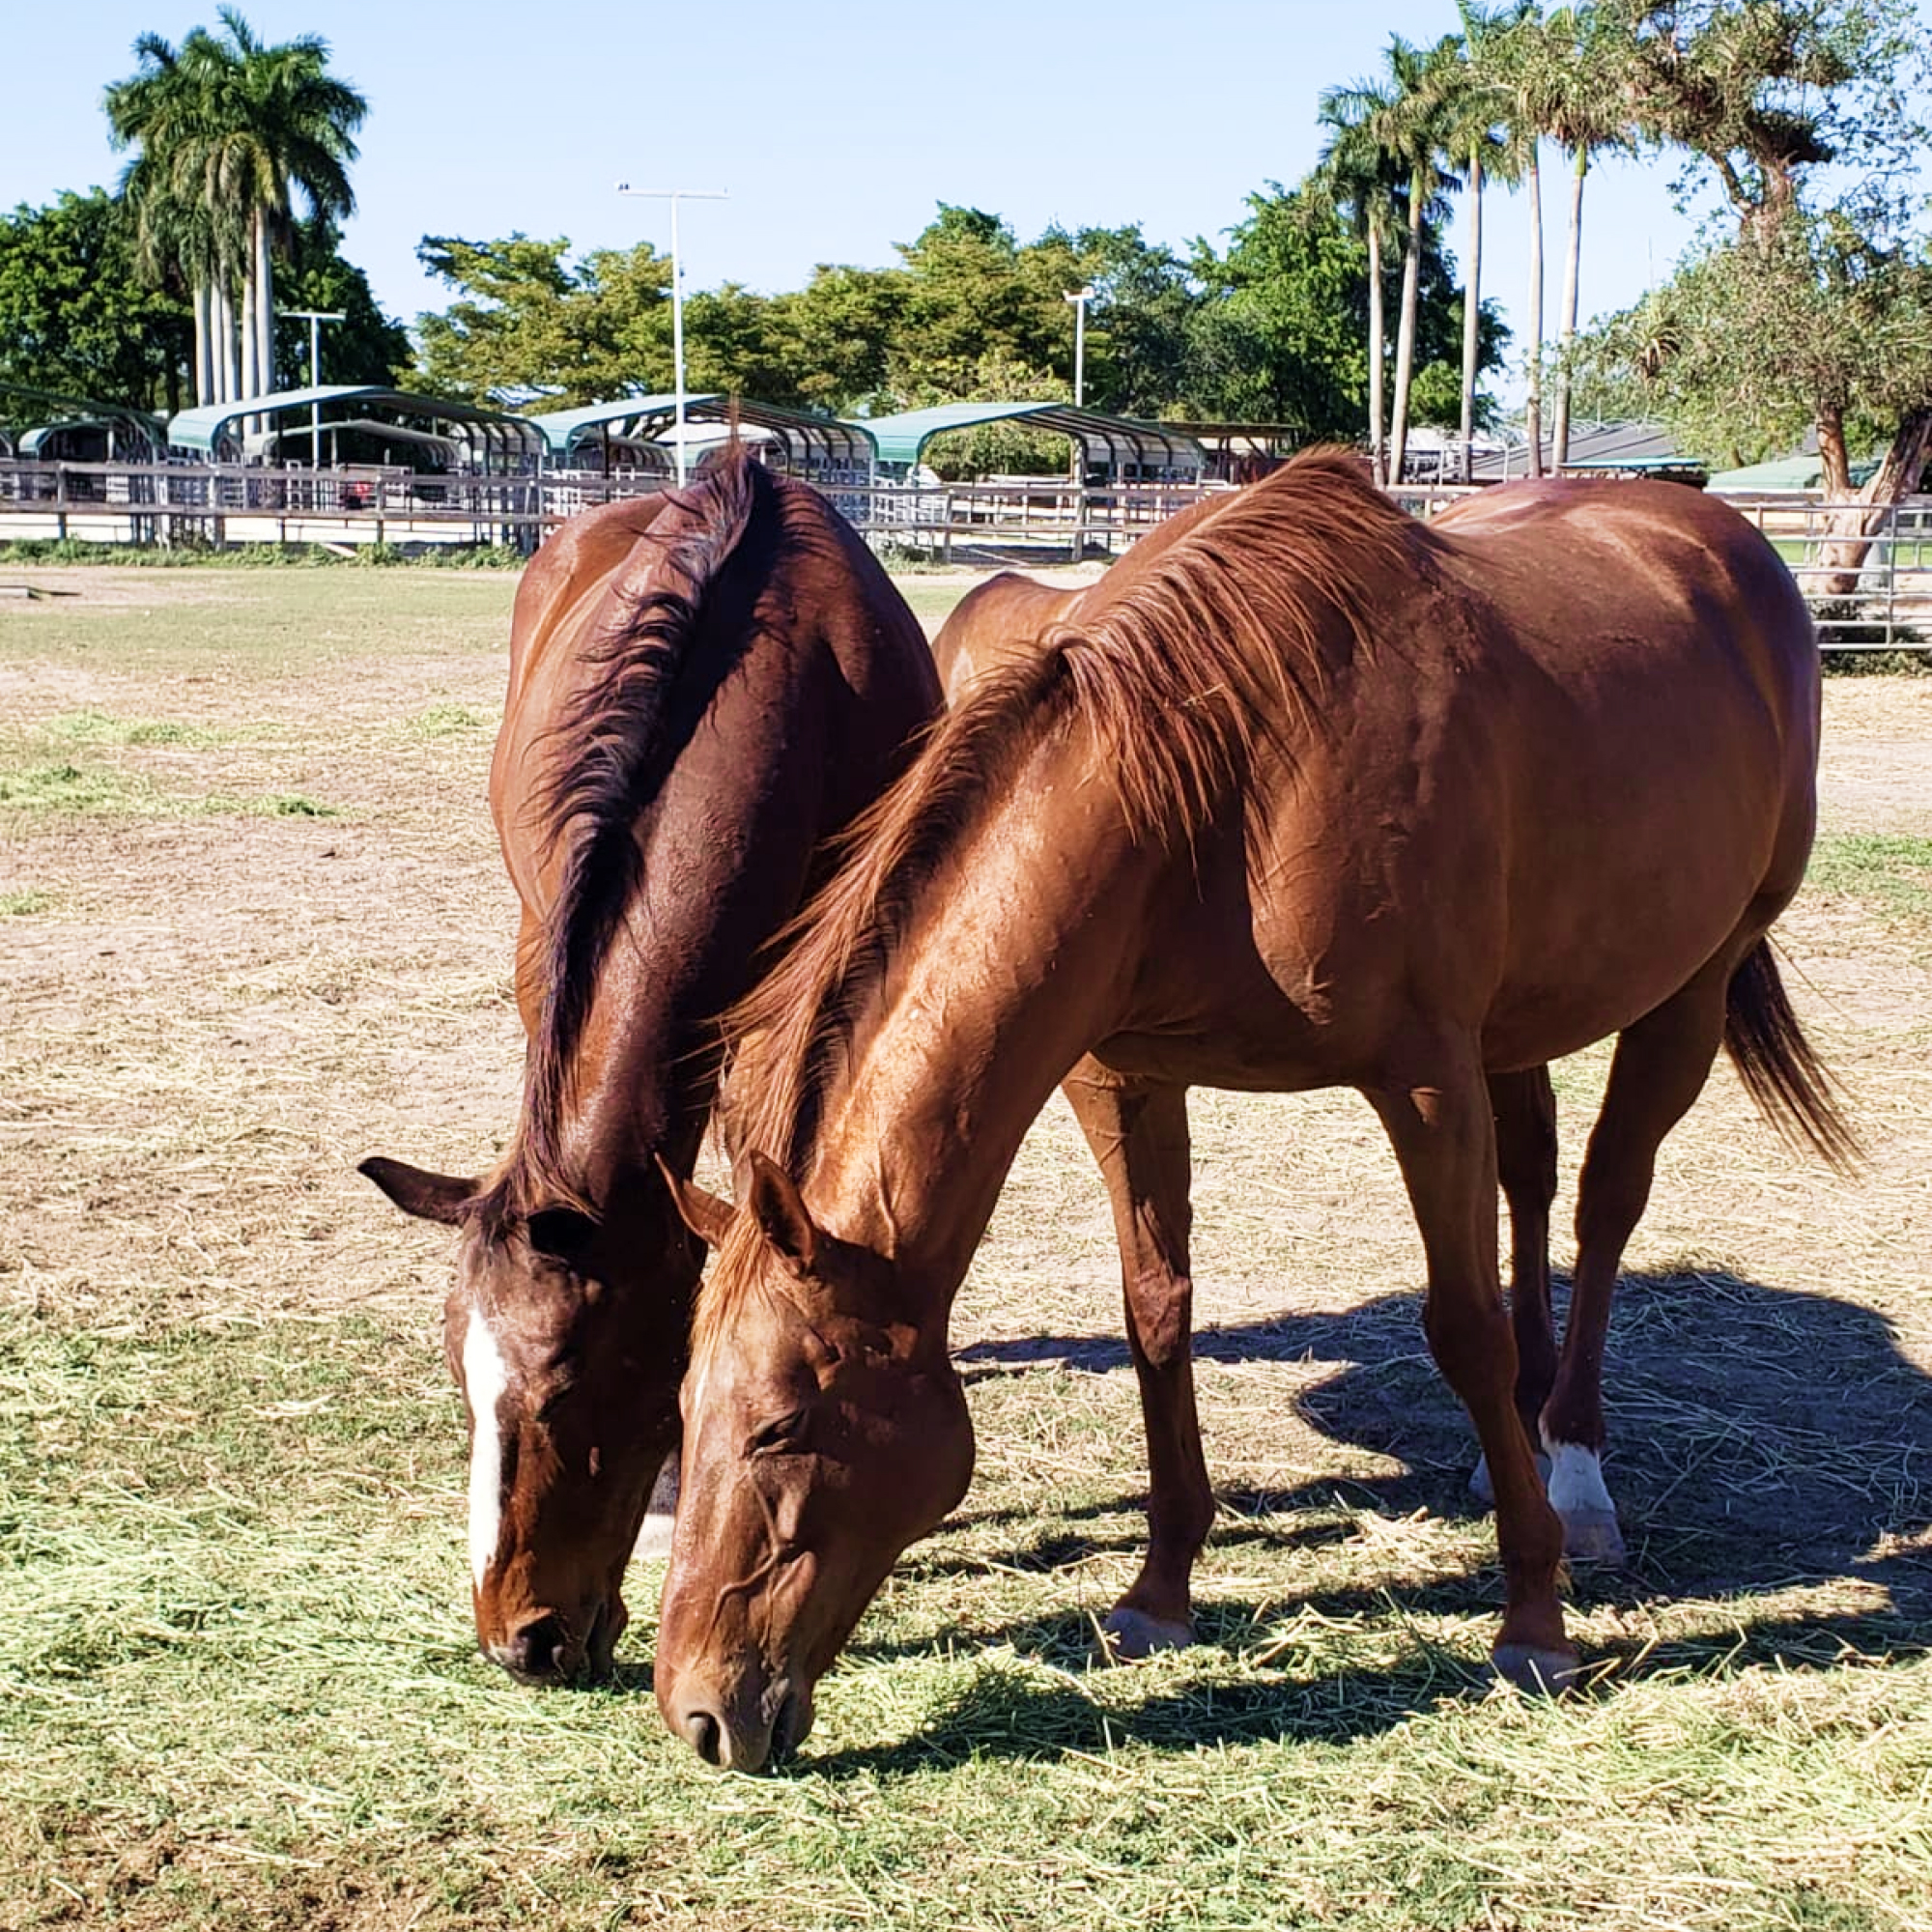 Horses Rehabilitate together at the South Florida Society for the Prevention of Cruelty to Animals